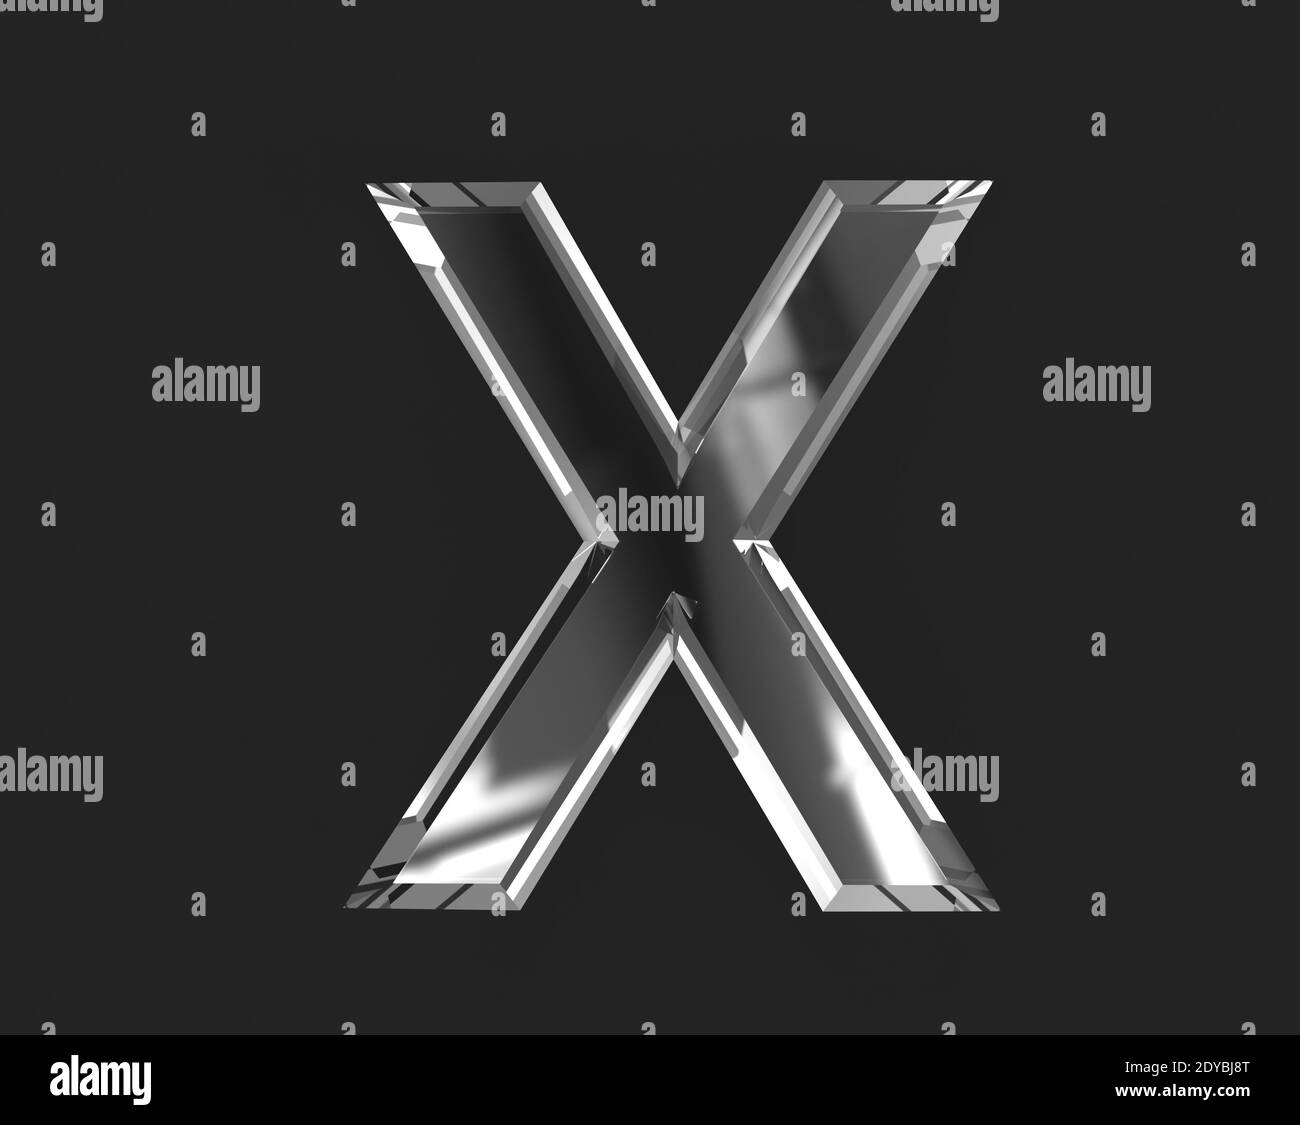 2,710 Shiny Red Letter X Images, Stock Photos, 3D objects